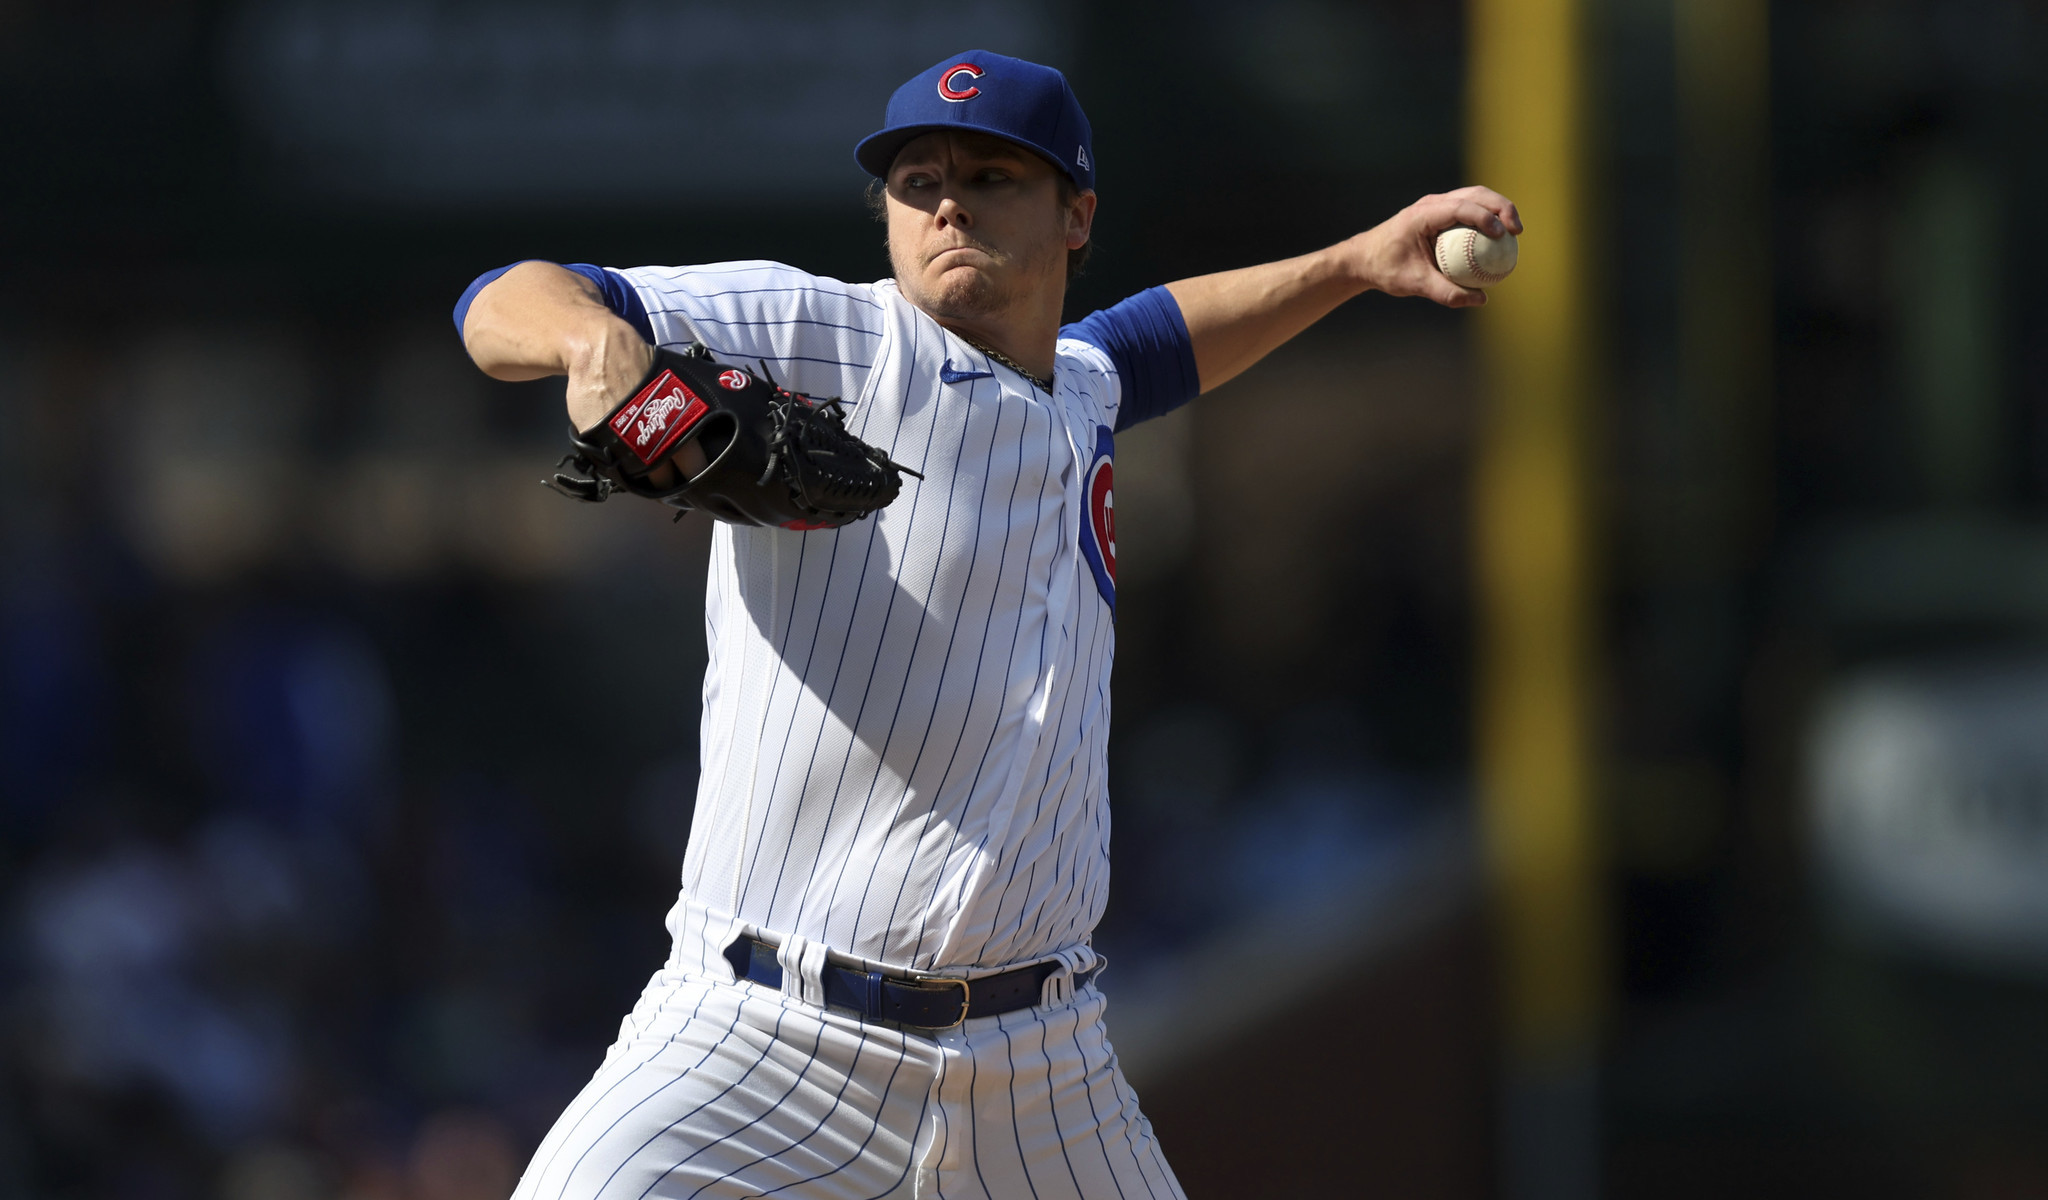 Justin Steele era has officially begun for the Cubs - Chicago Sun-Times